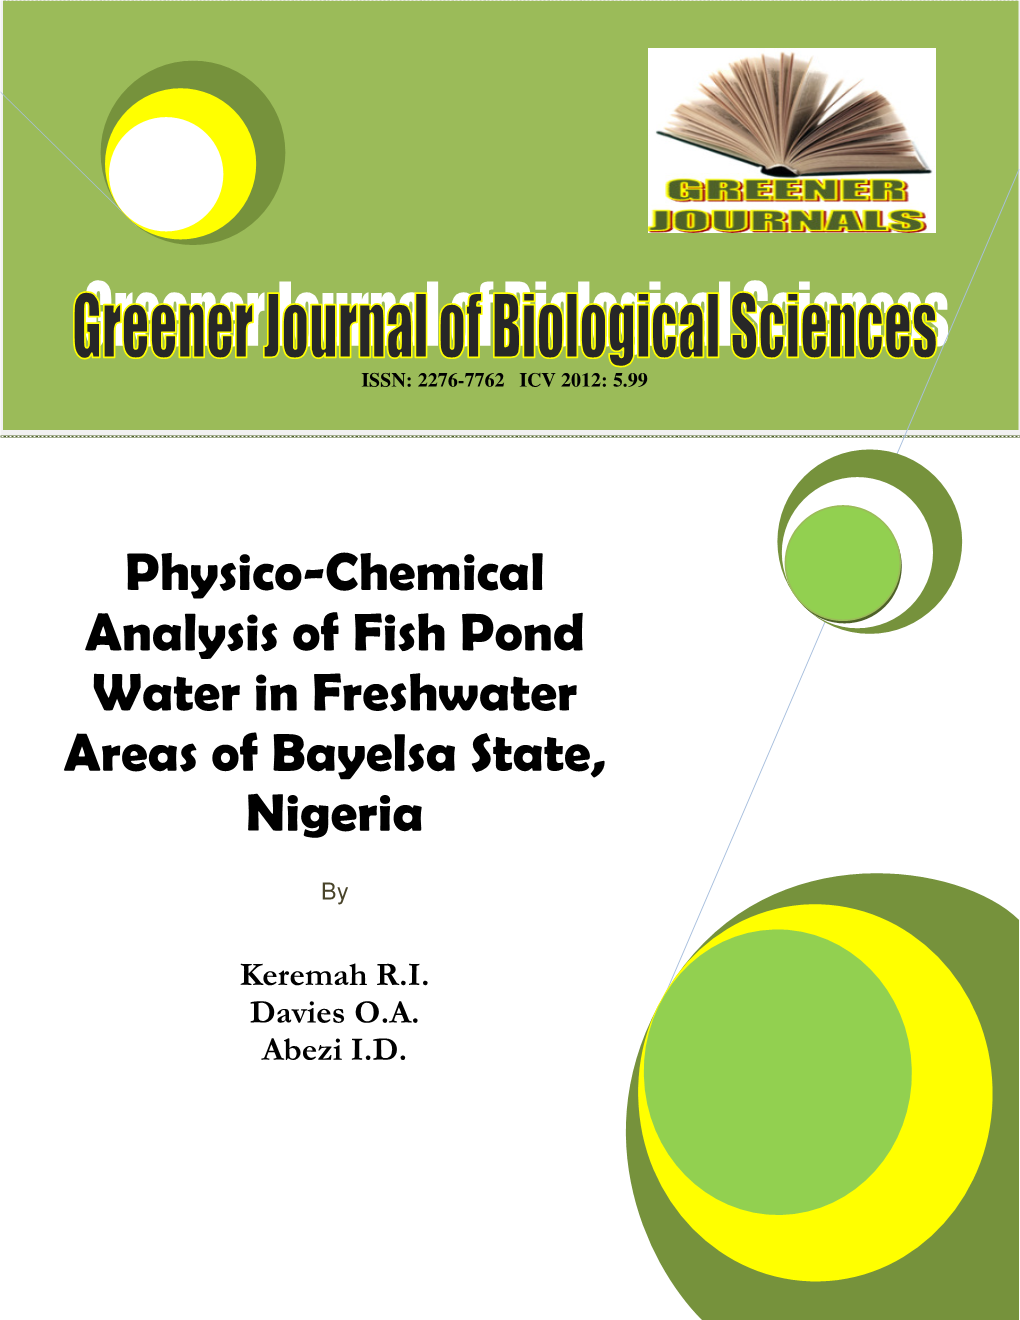 Physico-Chemical Analysis of Fish Pond Water in Freshwater Areas of Bayelsa State, Nigeria